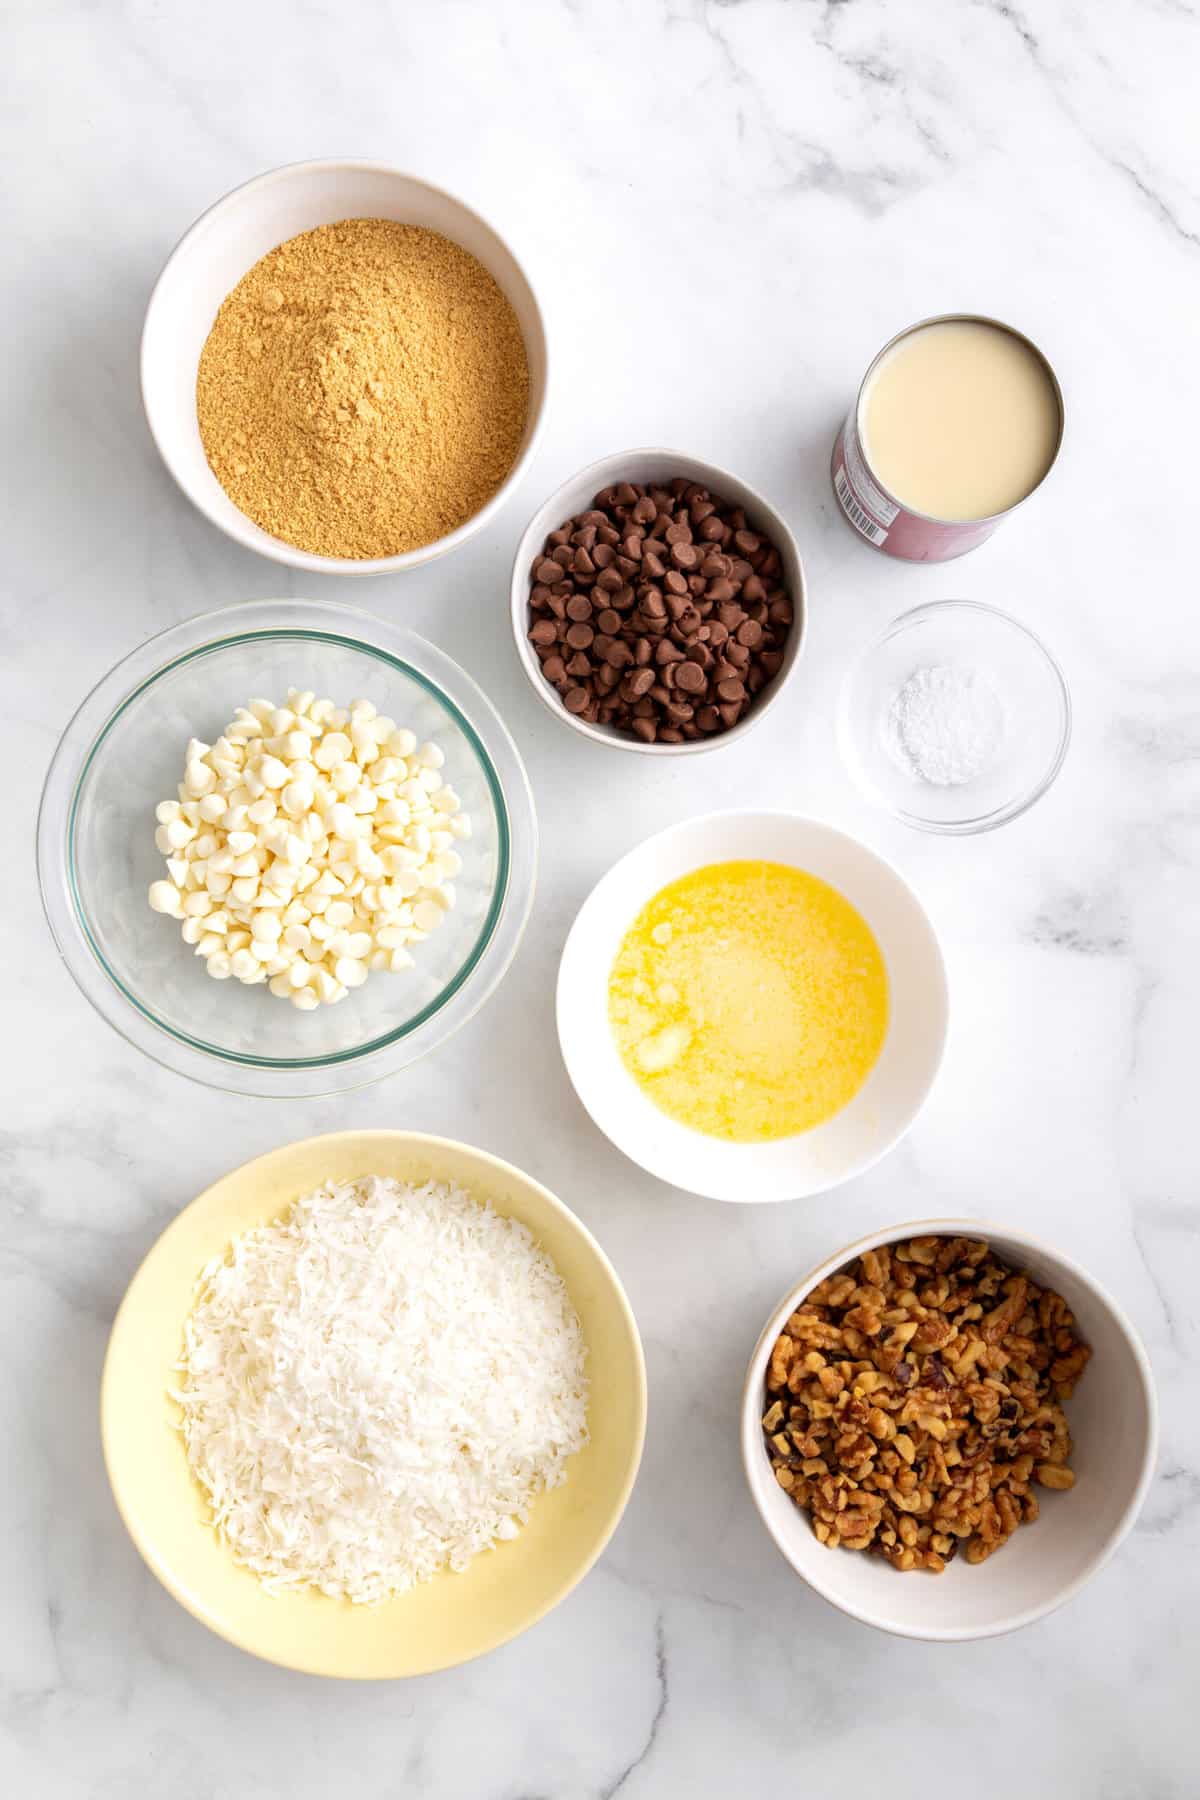 ingredients to make hello dolly bars